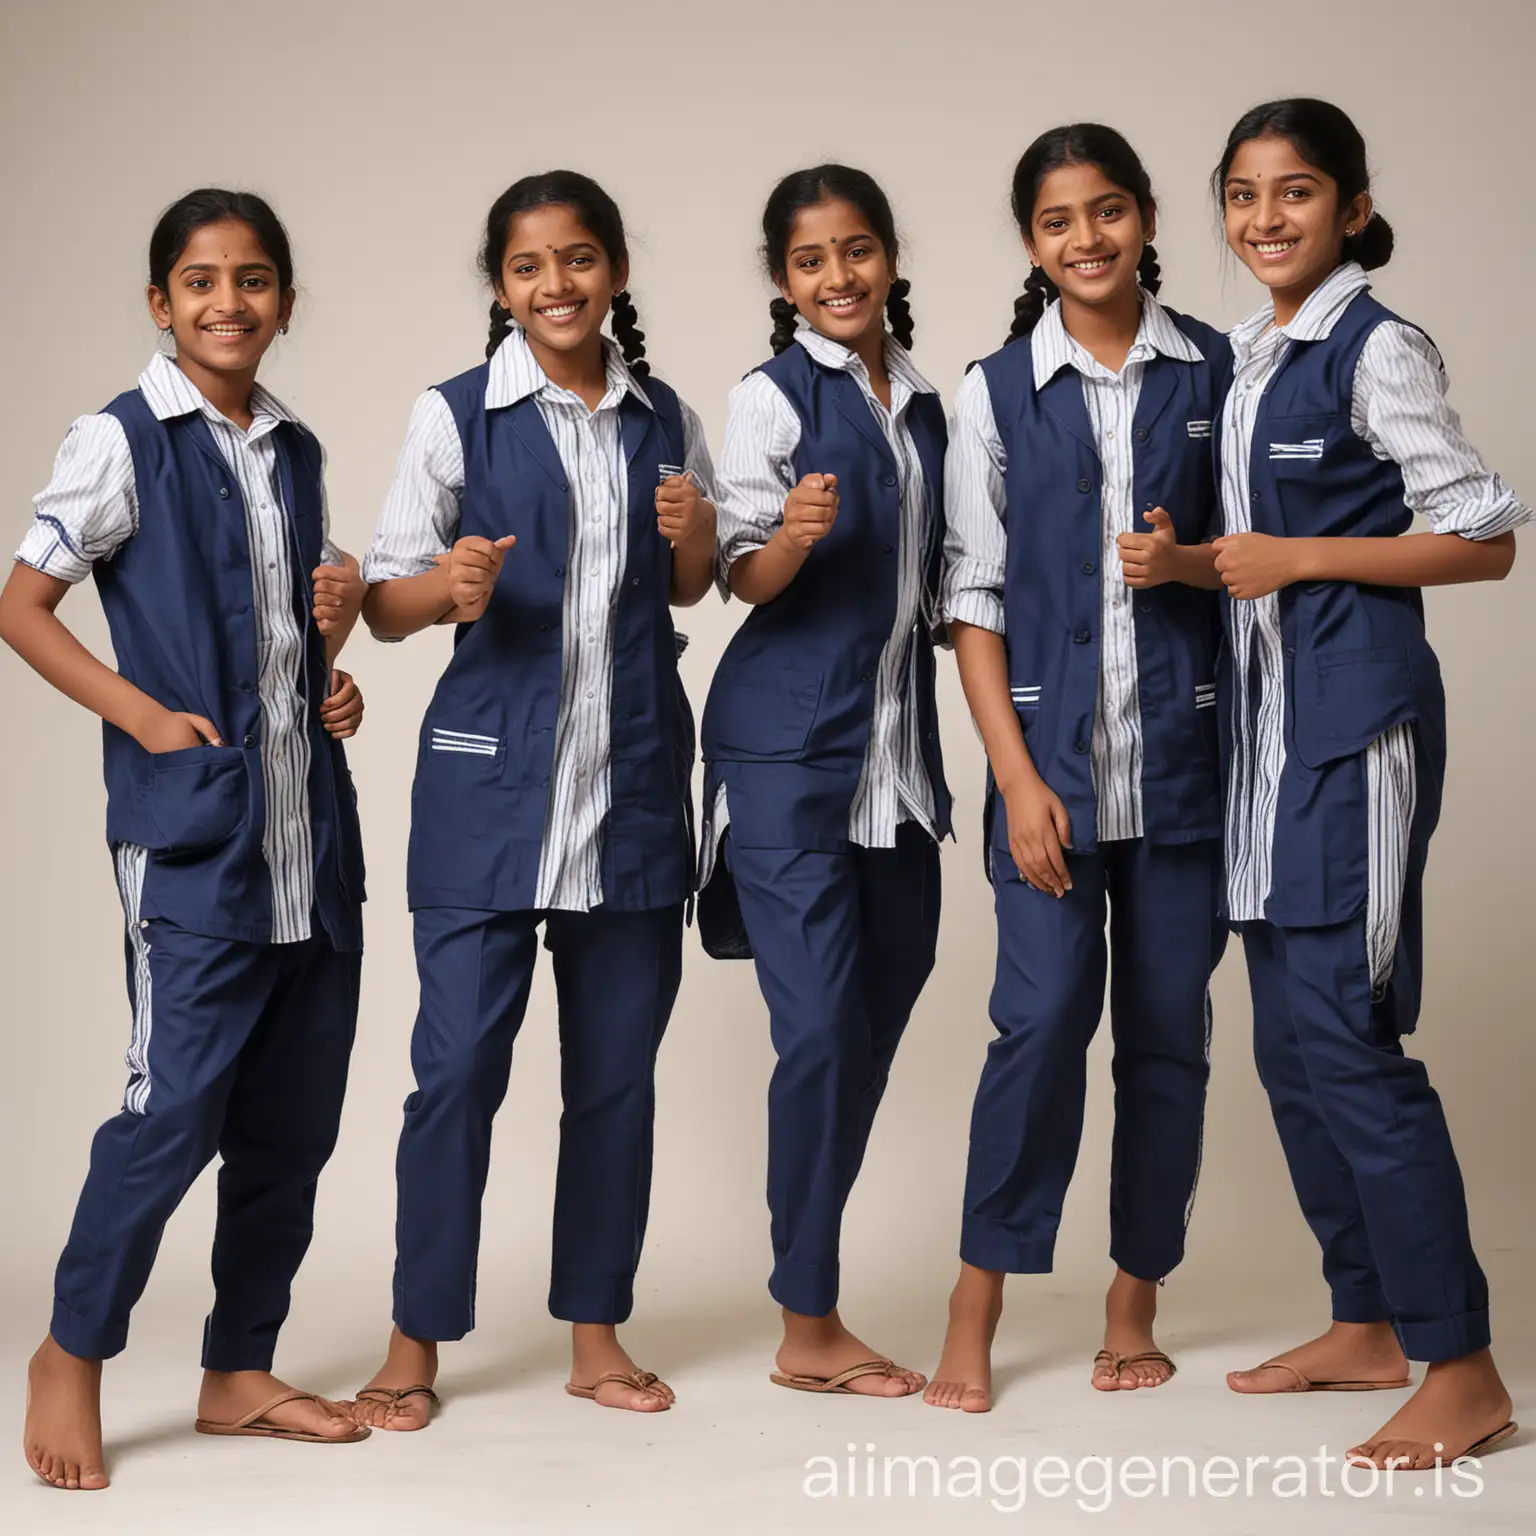 In Kerala, at least 5 students who have turned 18 celebrate their success by dancing and jumping. School Uniform: dark blue pants. Well tied dark blue sleeveless short jackets over long kurtas with white and light blue stripes. dark blue pants. White background.